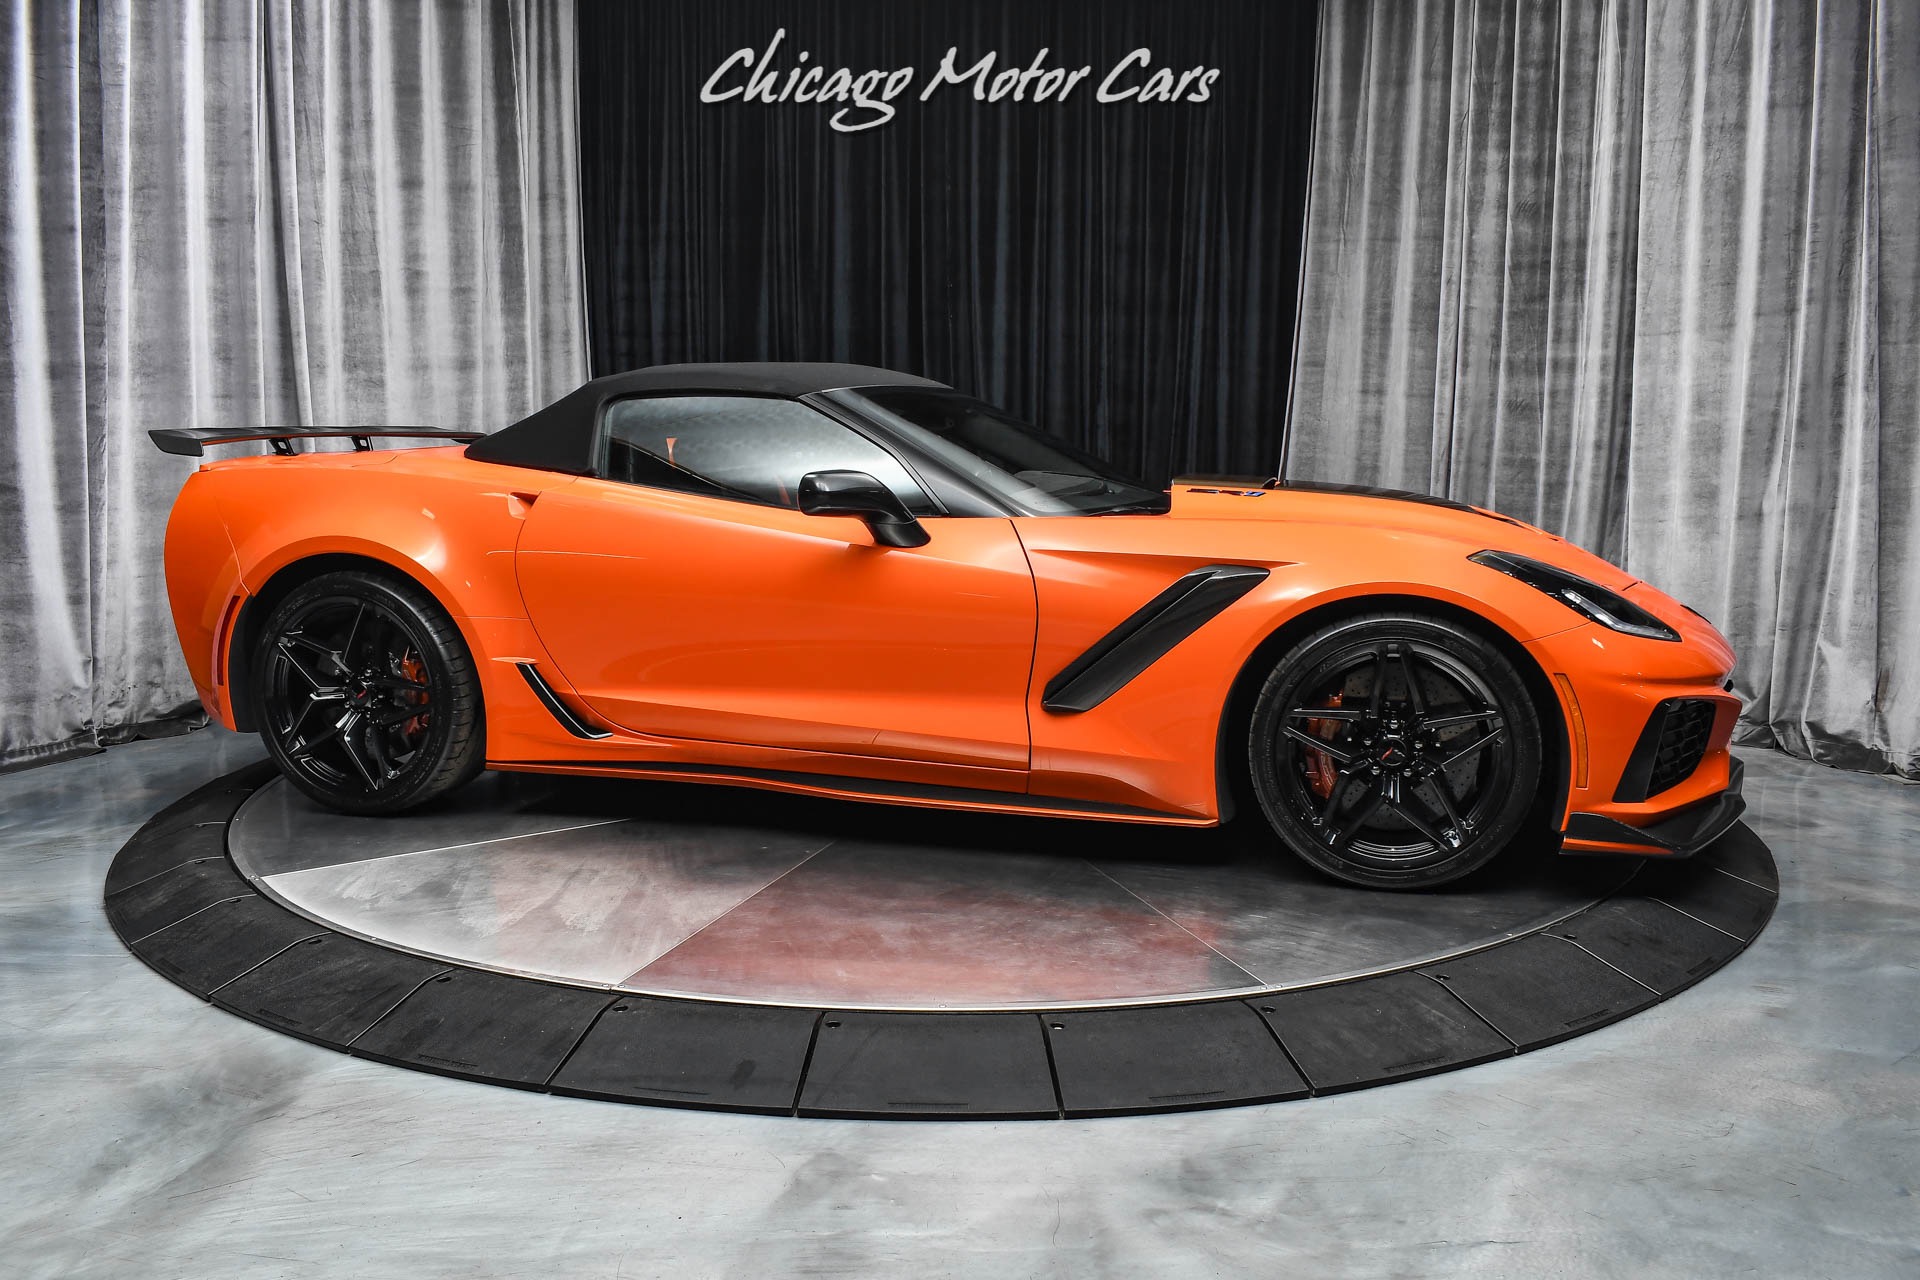 Used-2019-Chevrolet-Corvette-ZR1-Sebring-Orange-Convertible-Competition-Seats-Low-Miles-Loaded